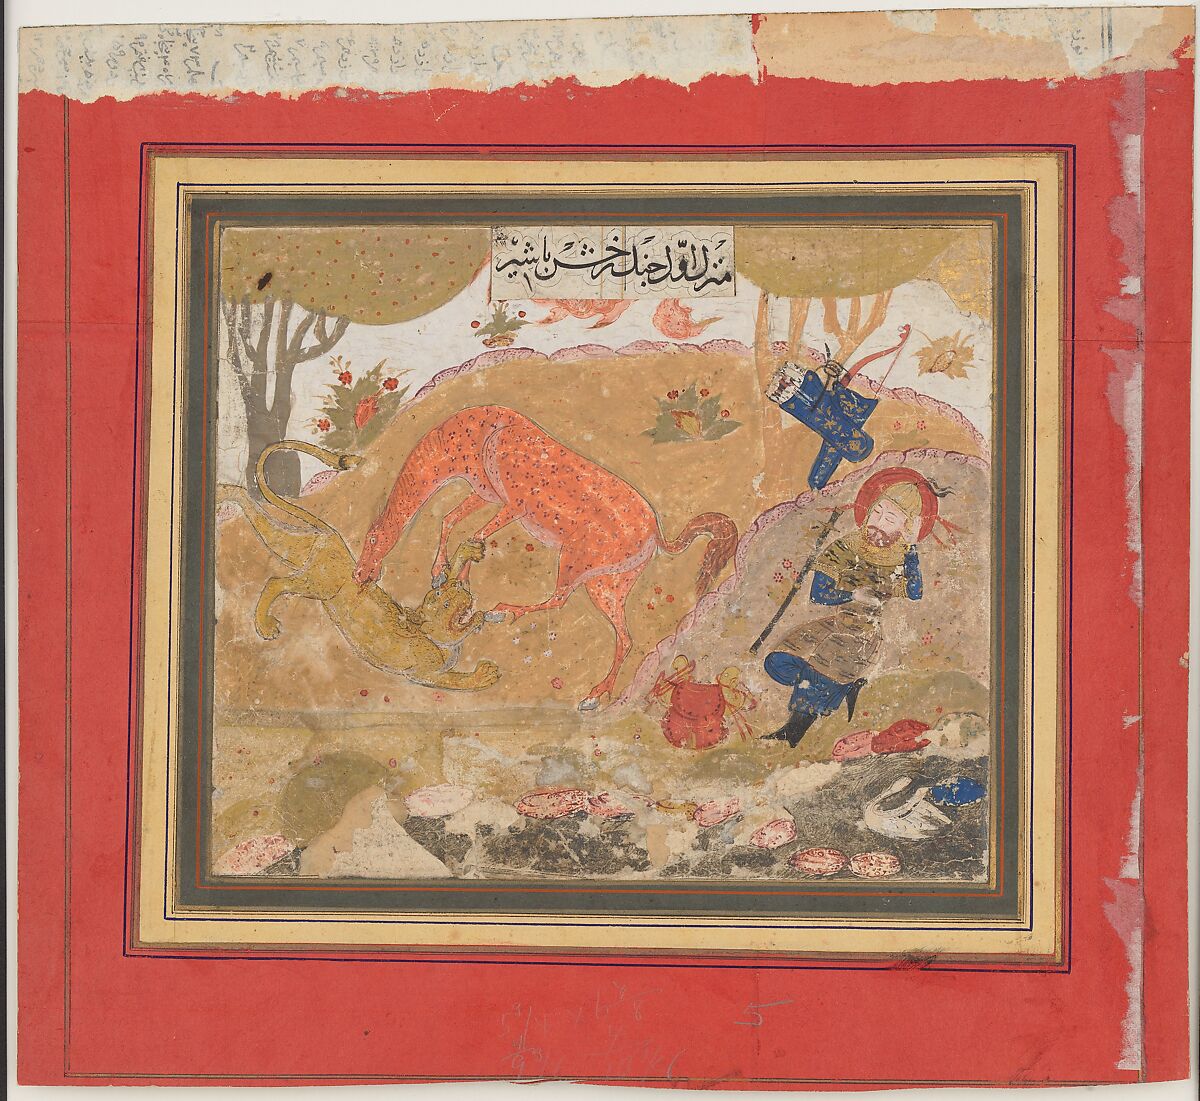 "Rustam's First Course: Rakhsh Kills a Lion", Folio from a Shahnama (Book of Kings), Abu'l Qasim Firdausi  Iranian, Ink, opaque watercolor, and gold on paper